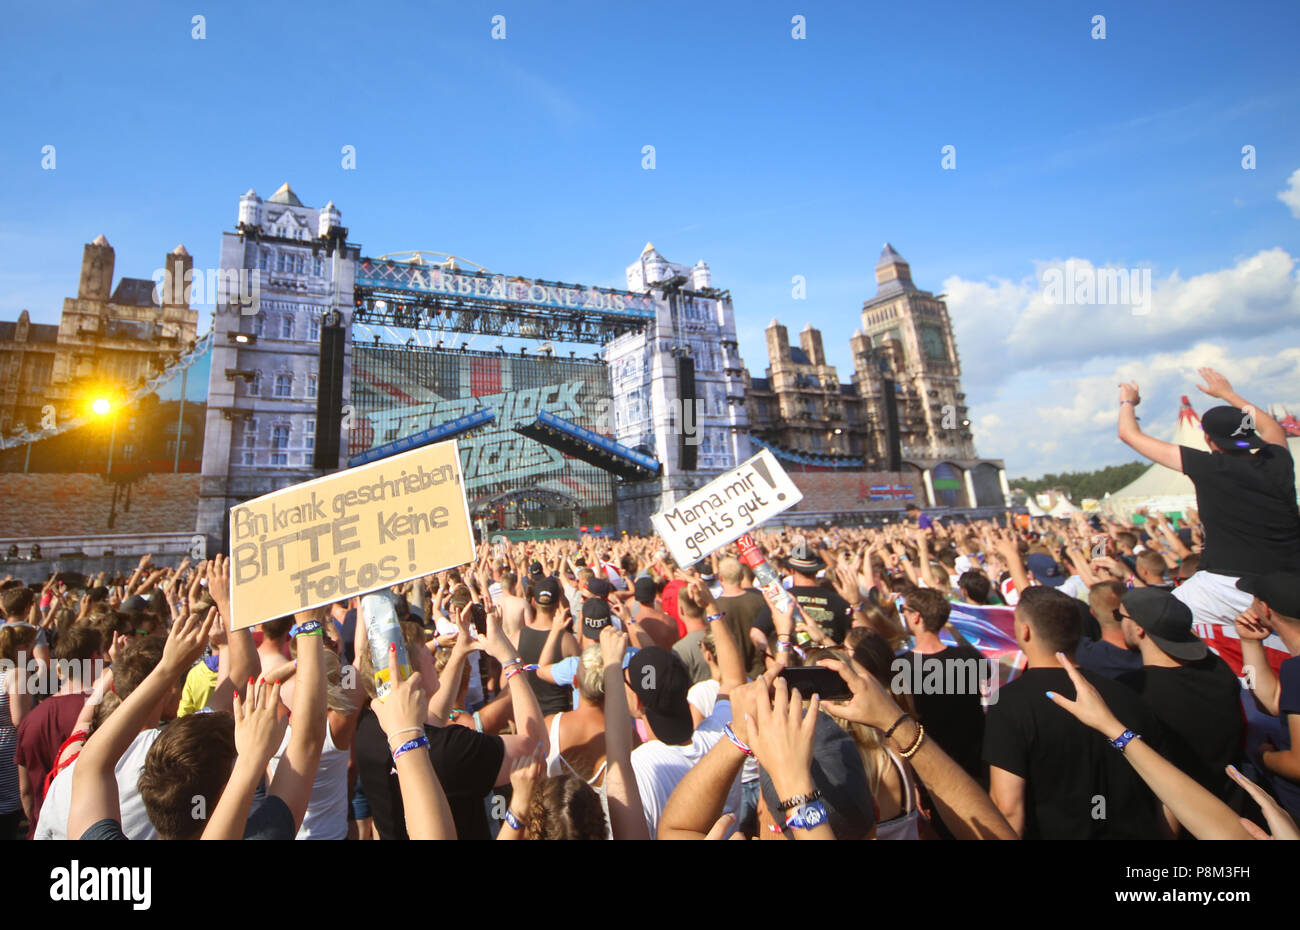 12 July 2018, Germany, Neustadt-Glewe: Visitors holding up signs at the electro music festival 'Airbeat One' with the phrases 'bin krank geschrieben, bitte keine Fotos' (lit. I called in sick, no photos please) and 'Mama, mir geht's gut' (lit. I'm OK mum). The festival started on Wednesday with the motto 'Great Britain'. Up to 55,000 visitors are expected to attend each day. Around 170 Djs and artists will be providing a varied line-up until it's finish on Sunday at 8am. Photo: Danny Gohlke/dpa-Zentralbild/dpa Stock Photo